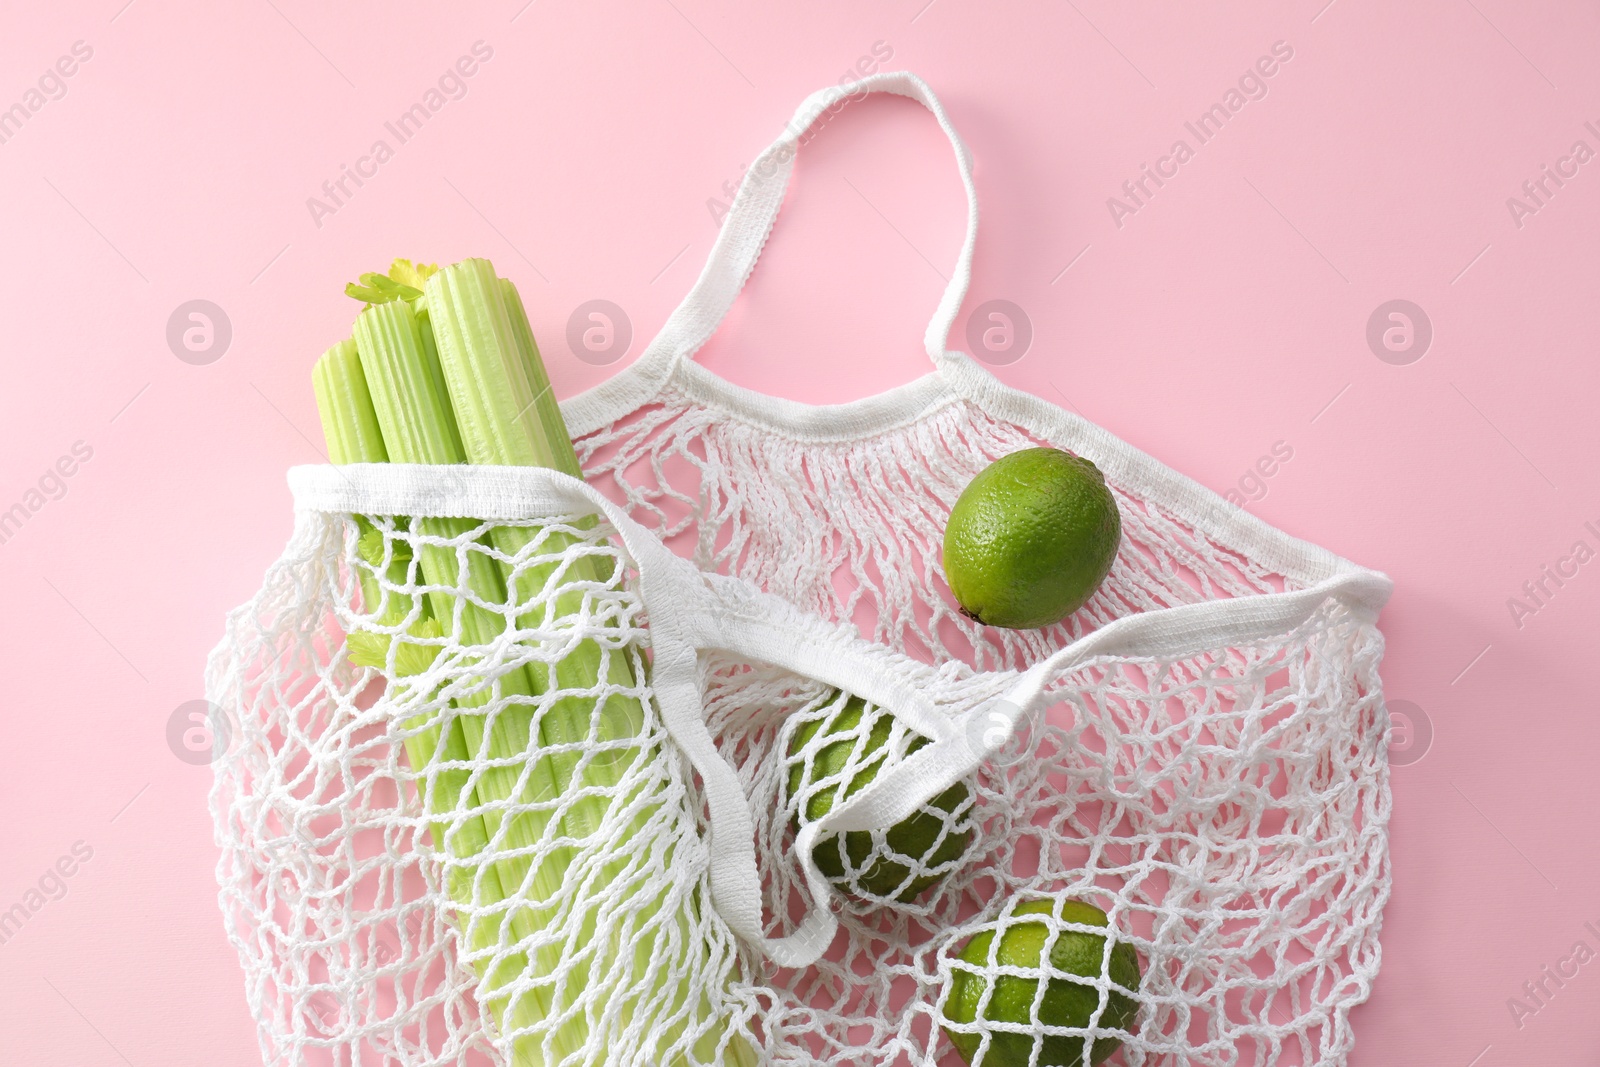 Photo of String bag with celery and limes on pink background, top view